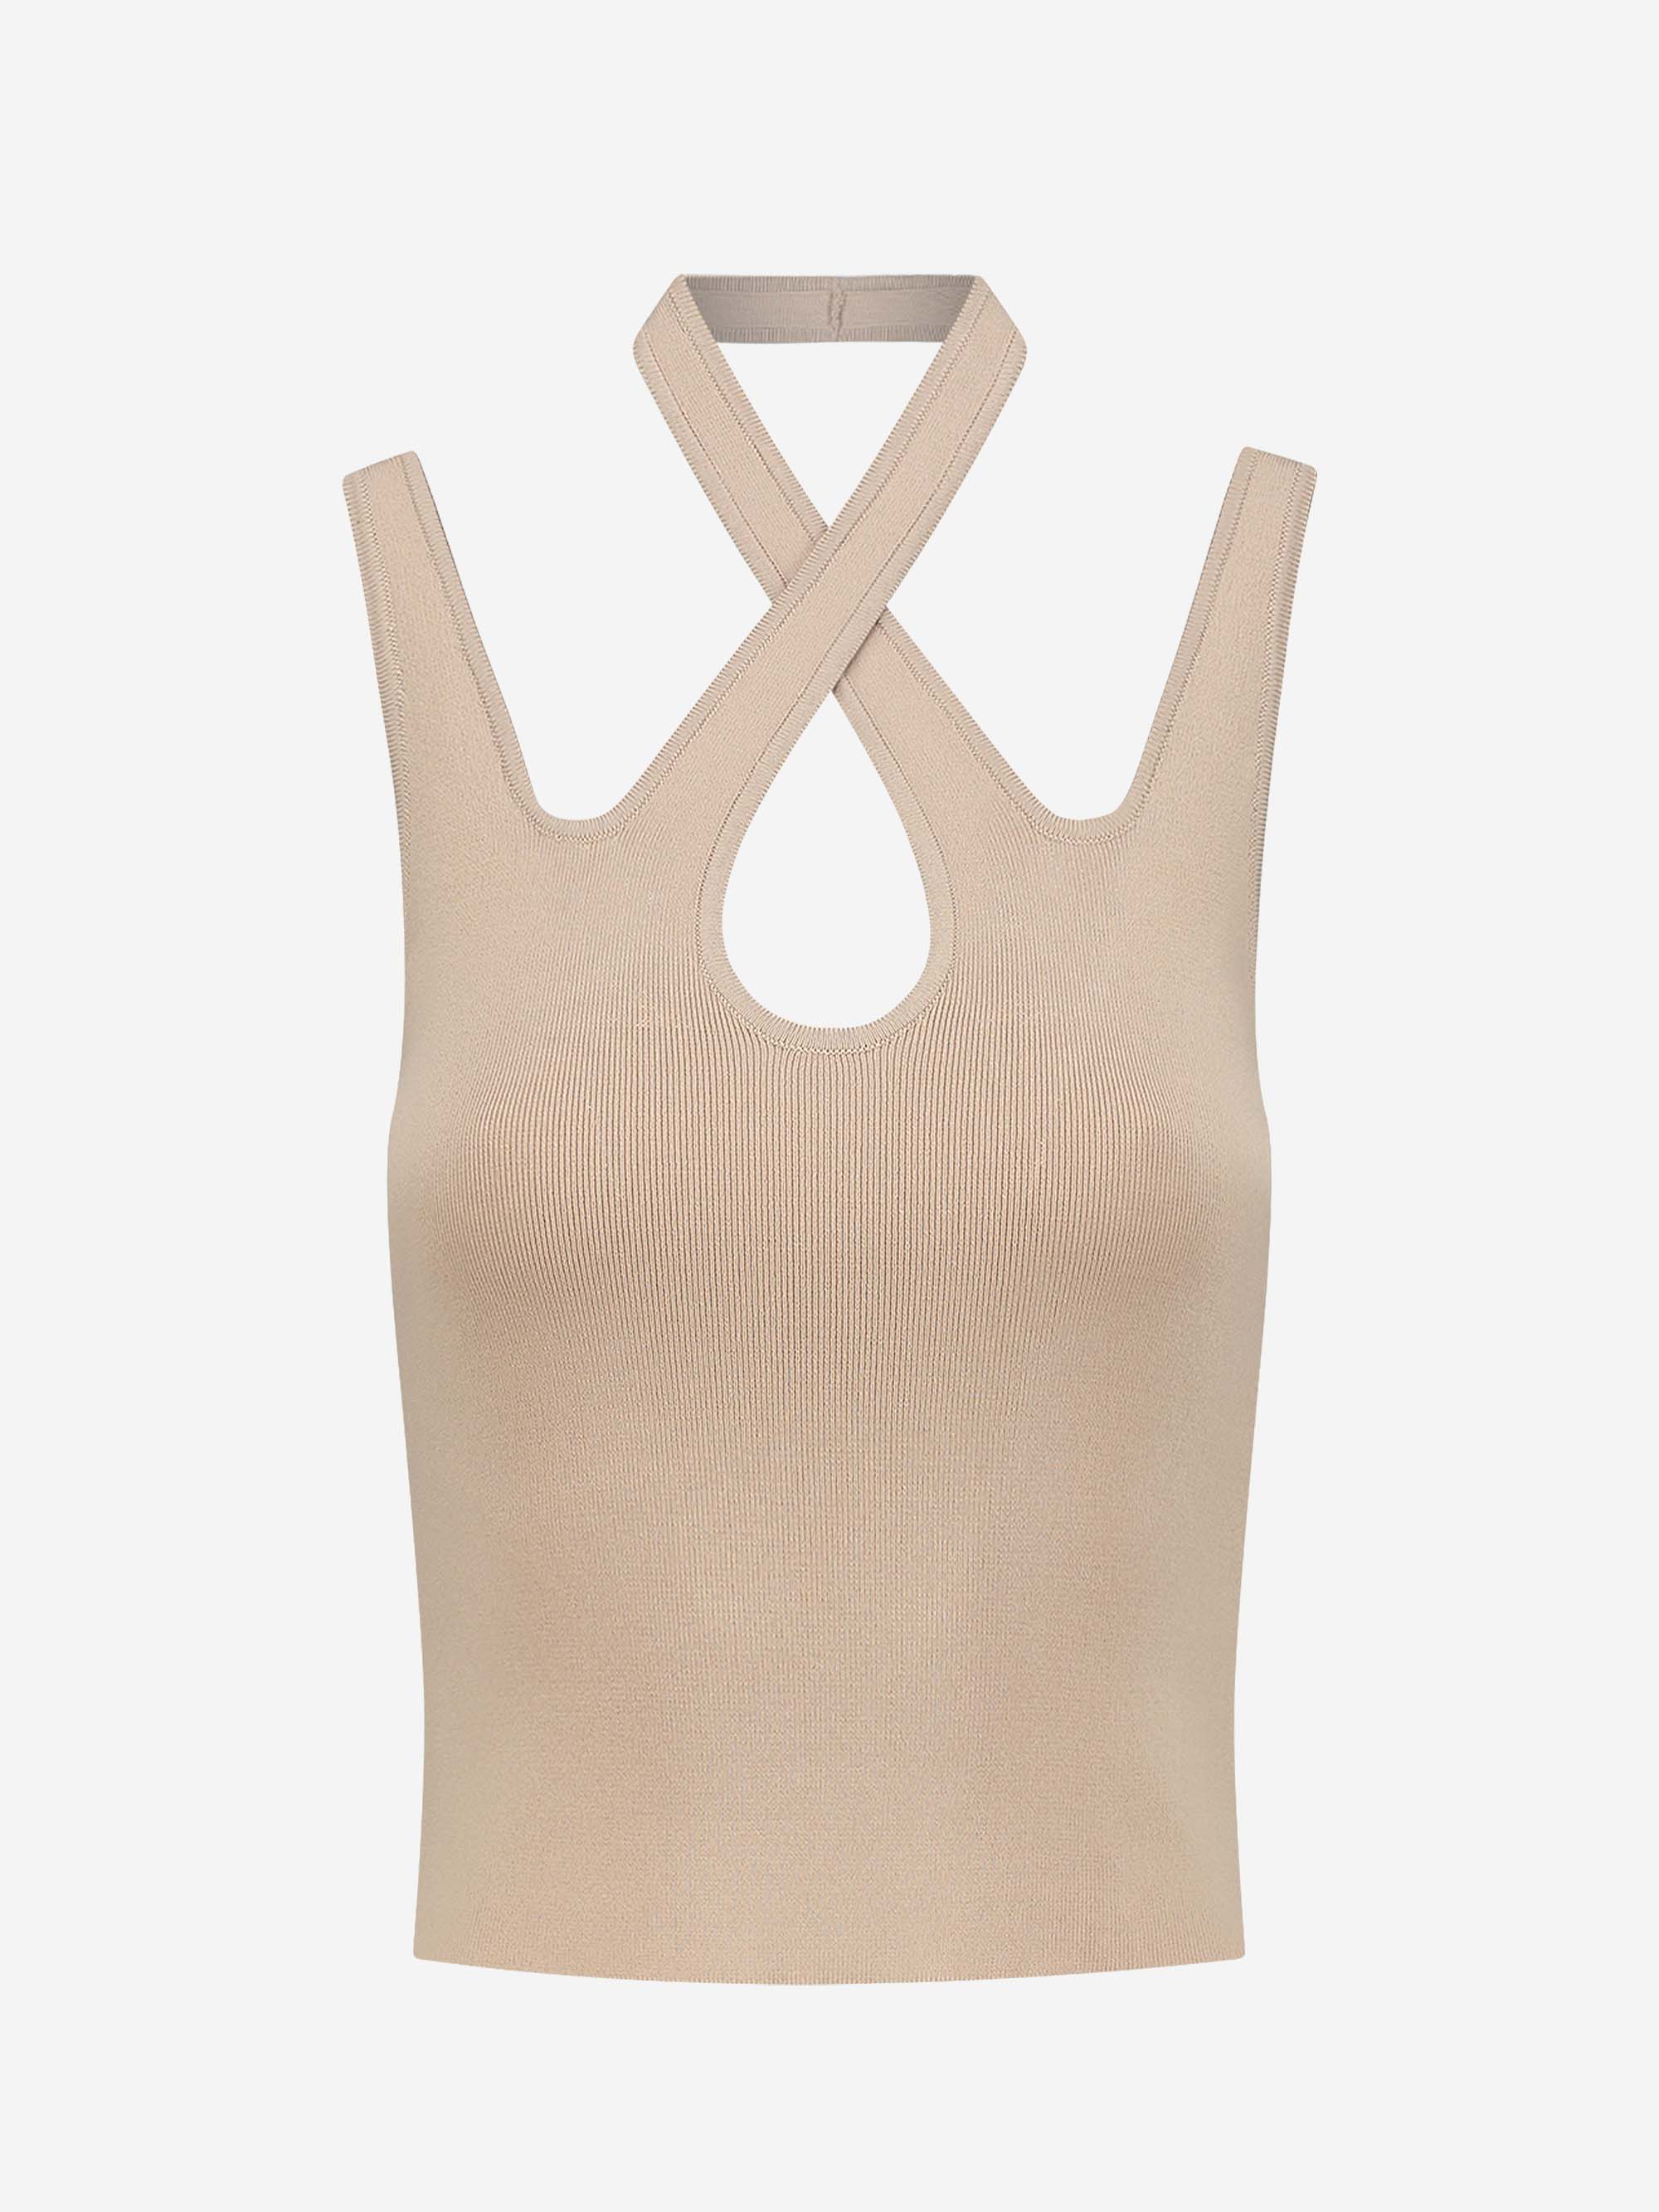 Fitted top with halter straps